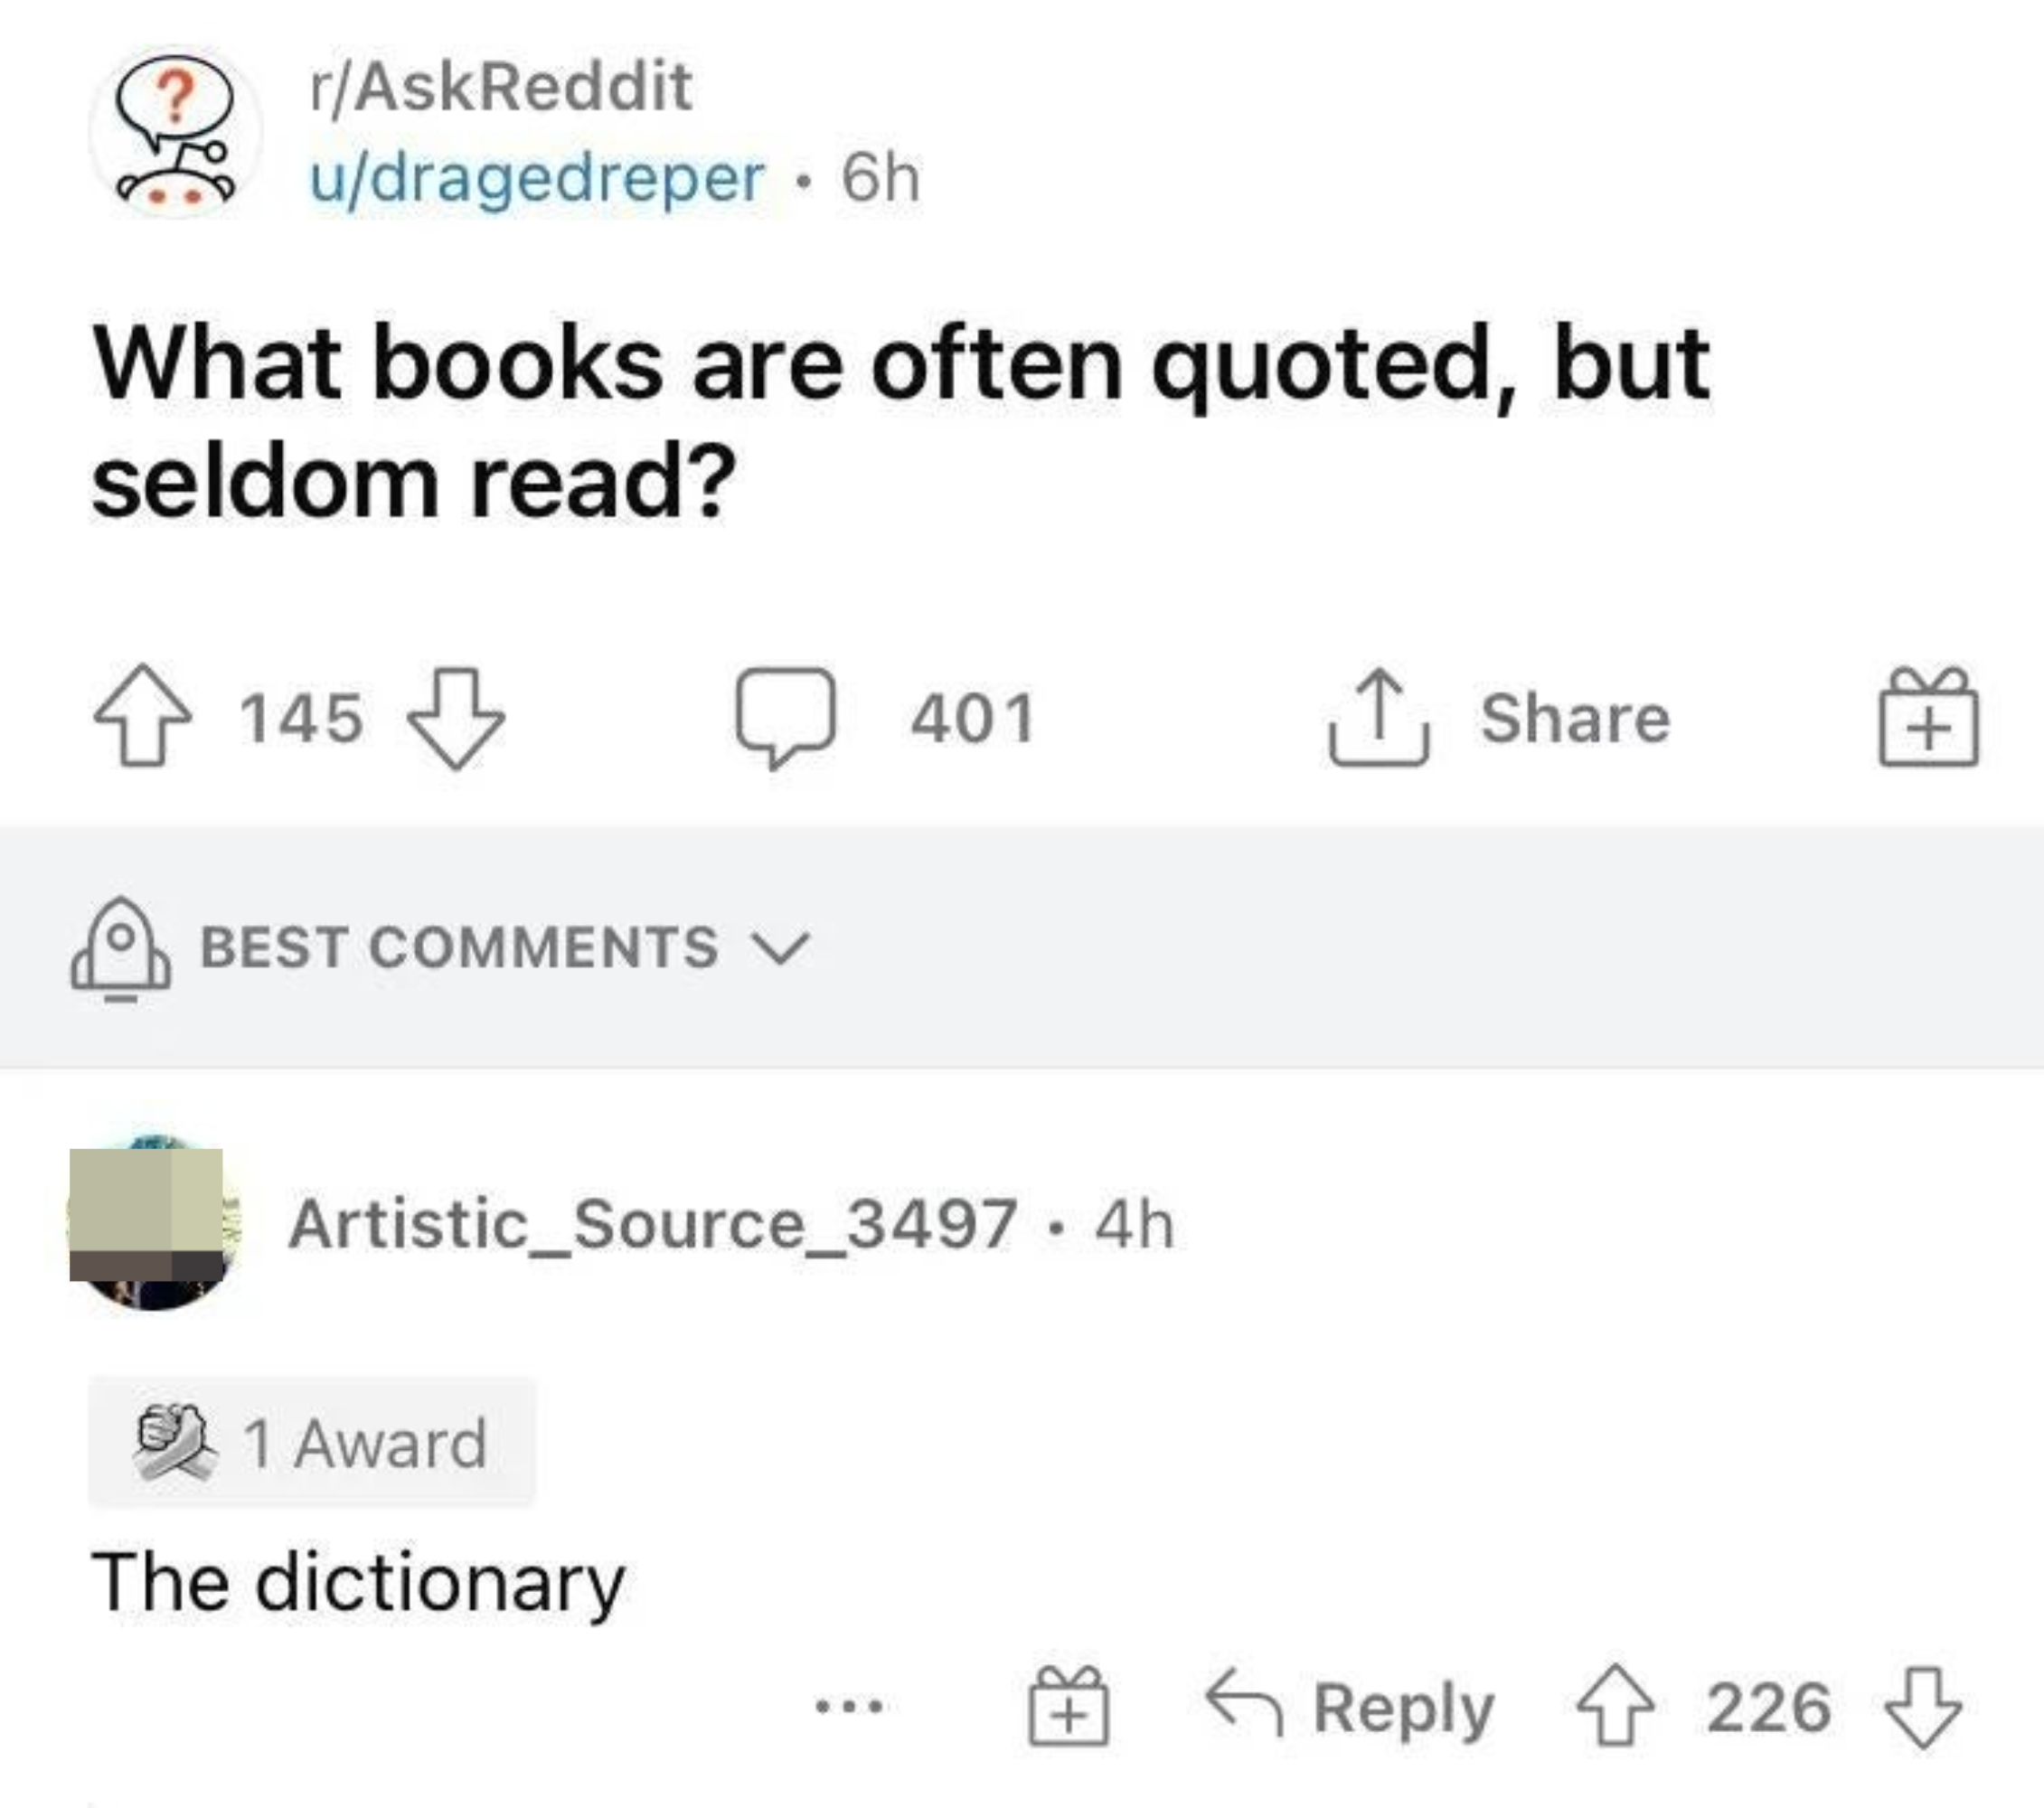 &quot;The dictionary&quot;